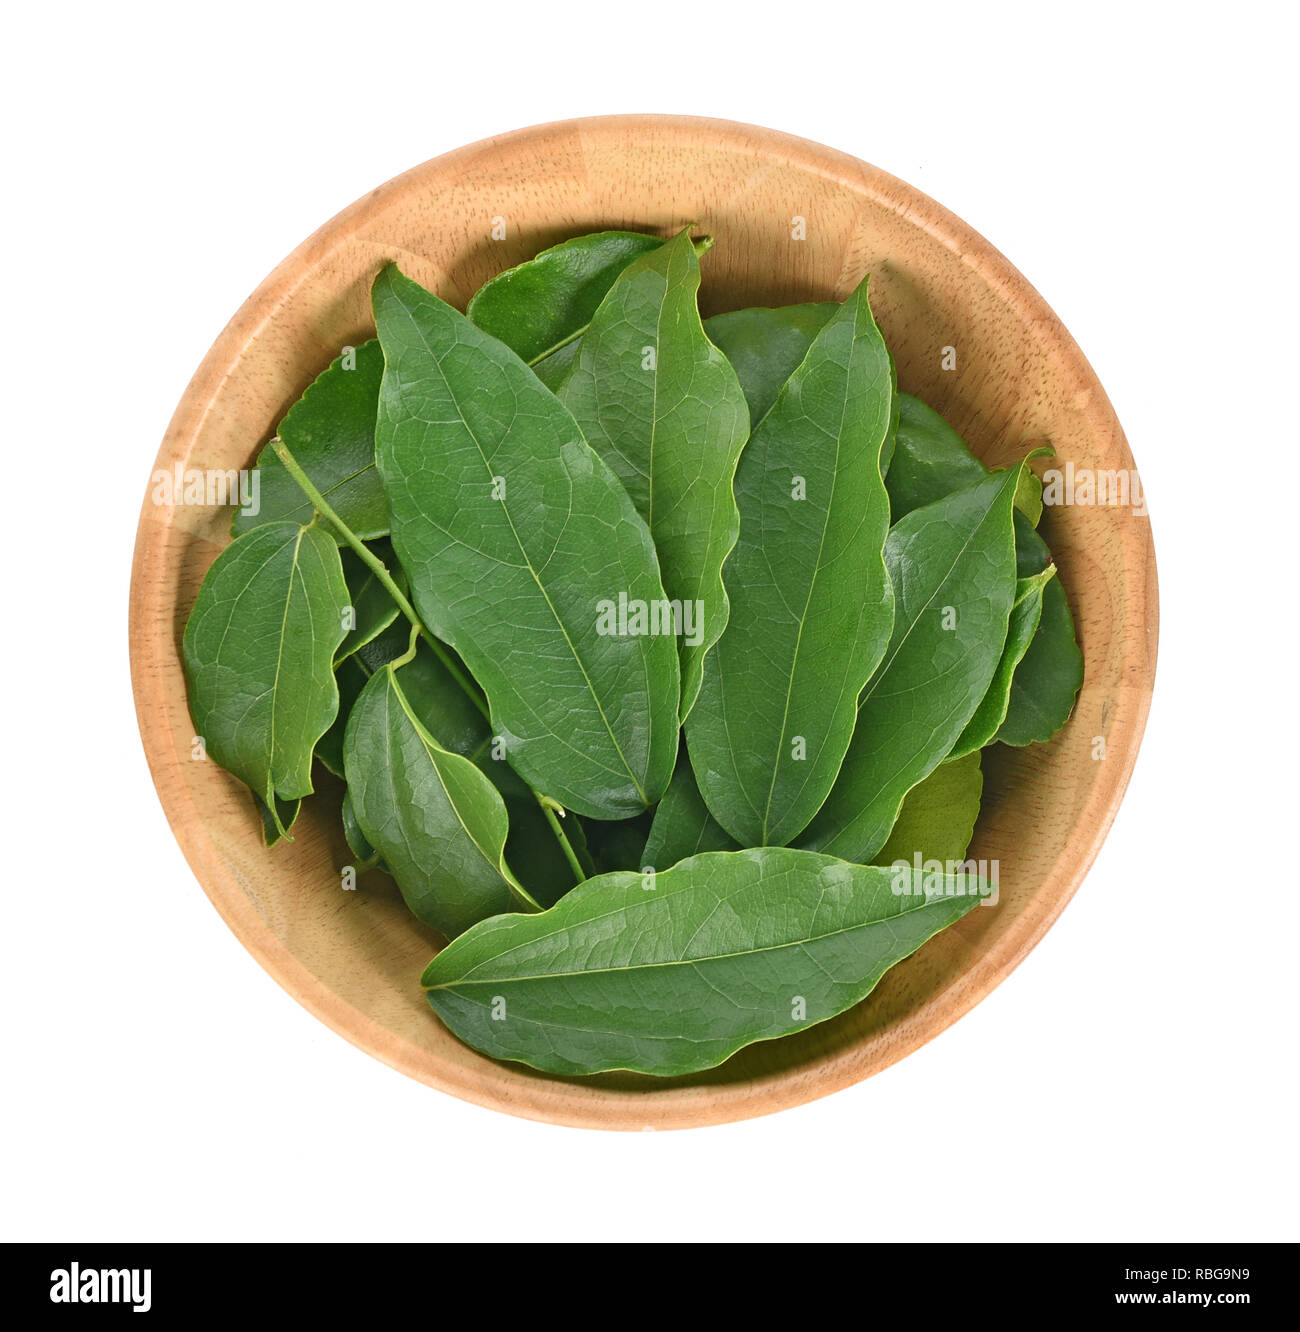 Top view of Yanang leaf in wooder bowl on white background Stock Photo